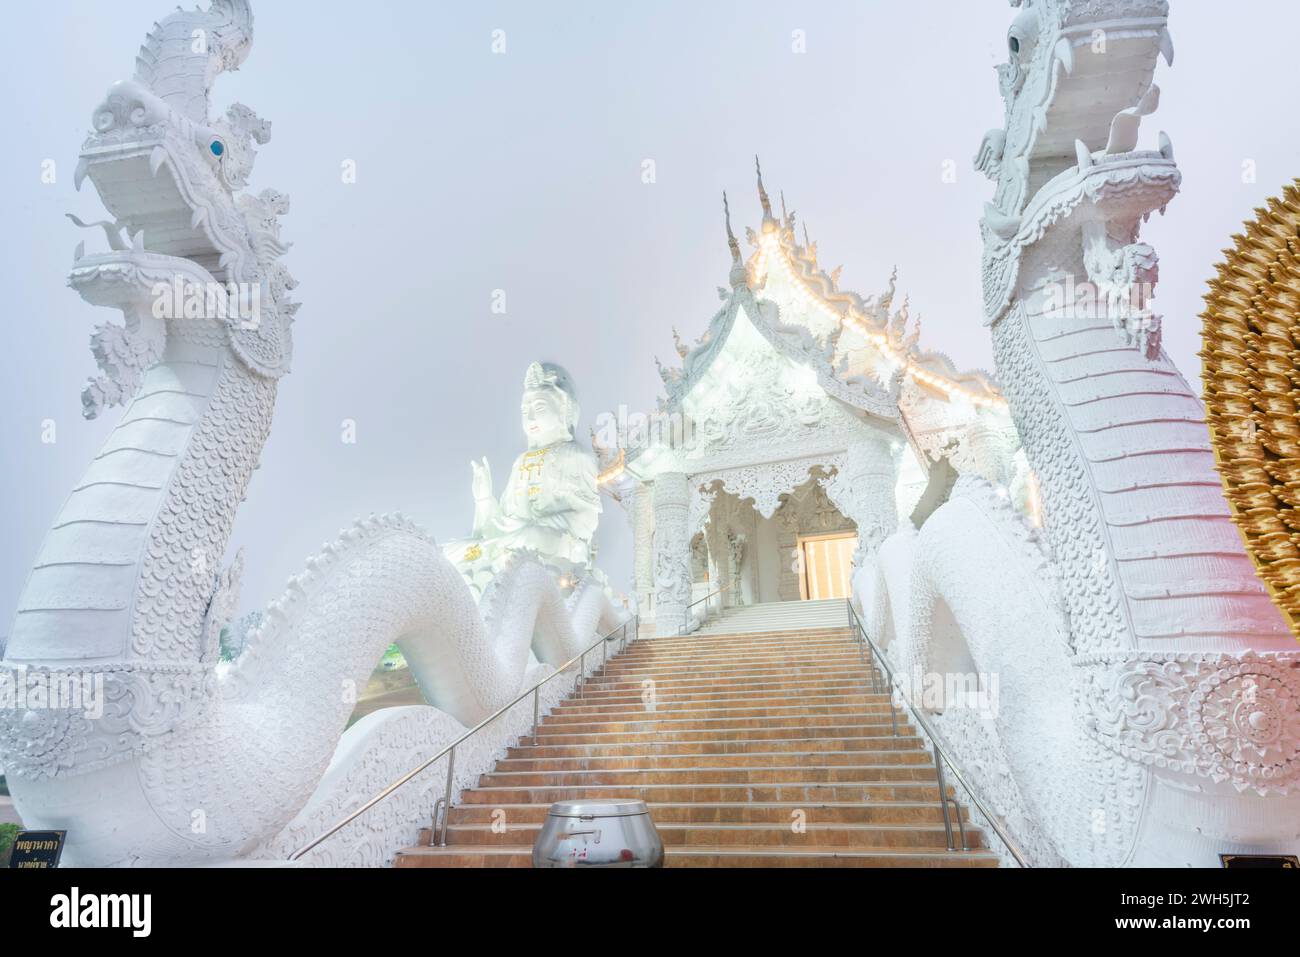 Illuminated at dusk,architecture is splendid with the mix of Chinese Guan Yin Statue, dragon stairs, white marble Buddha and Thaj style architecture.B Stock Photo